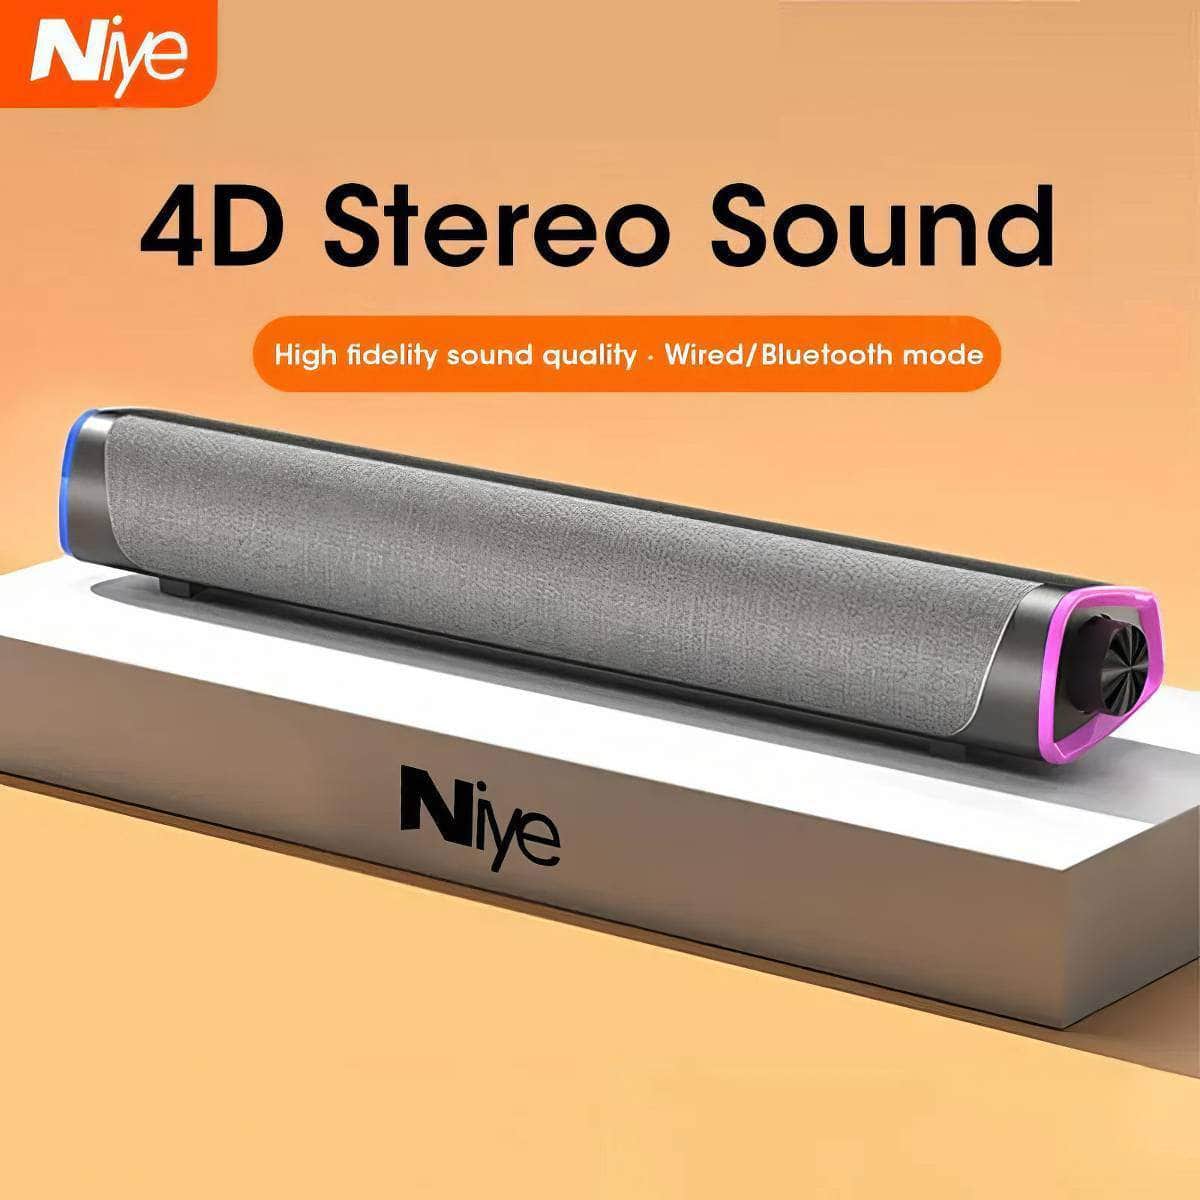 4D Bluetooth Computer Speaker Bar: Stereo Sound, Subwoofer, Wired